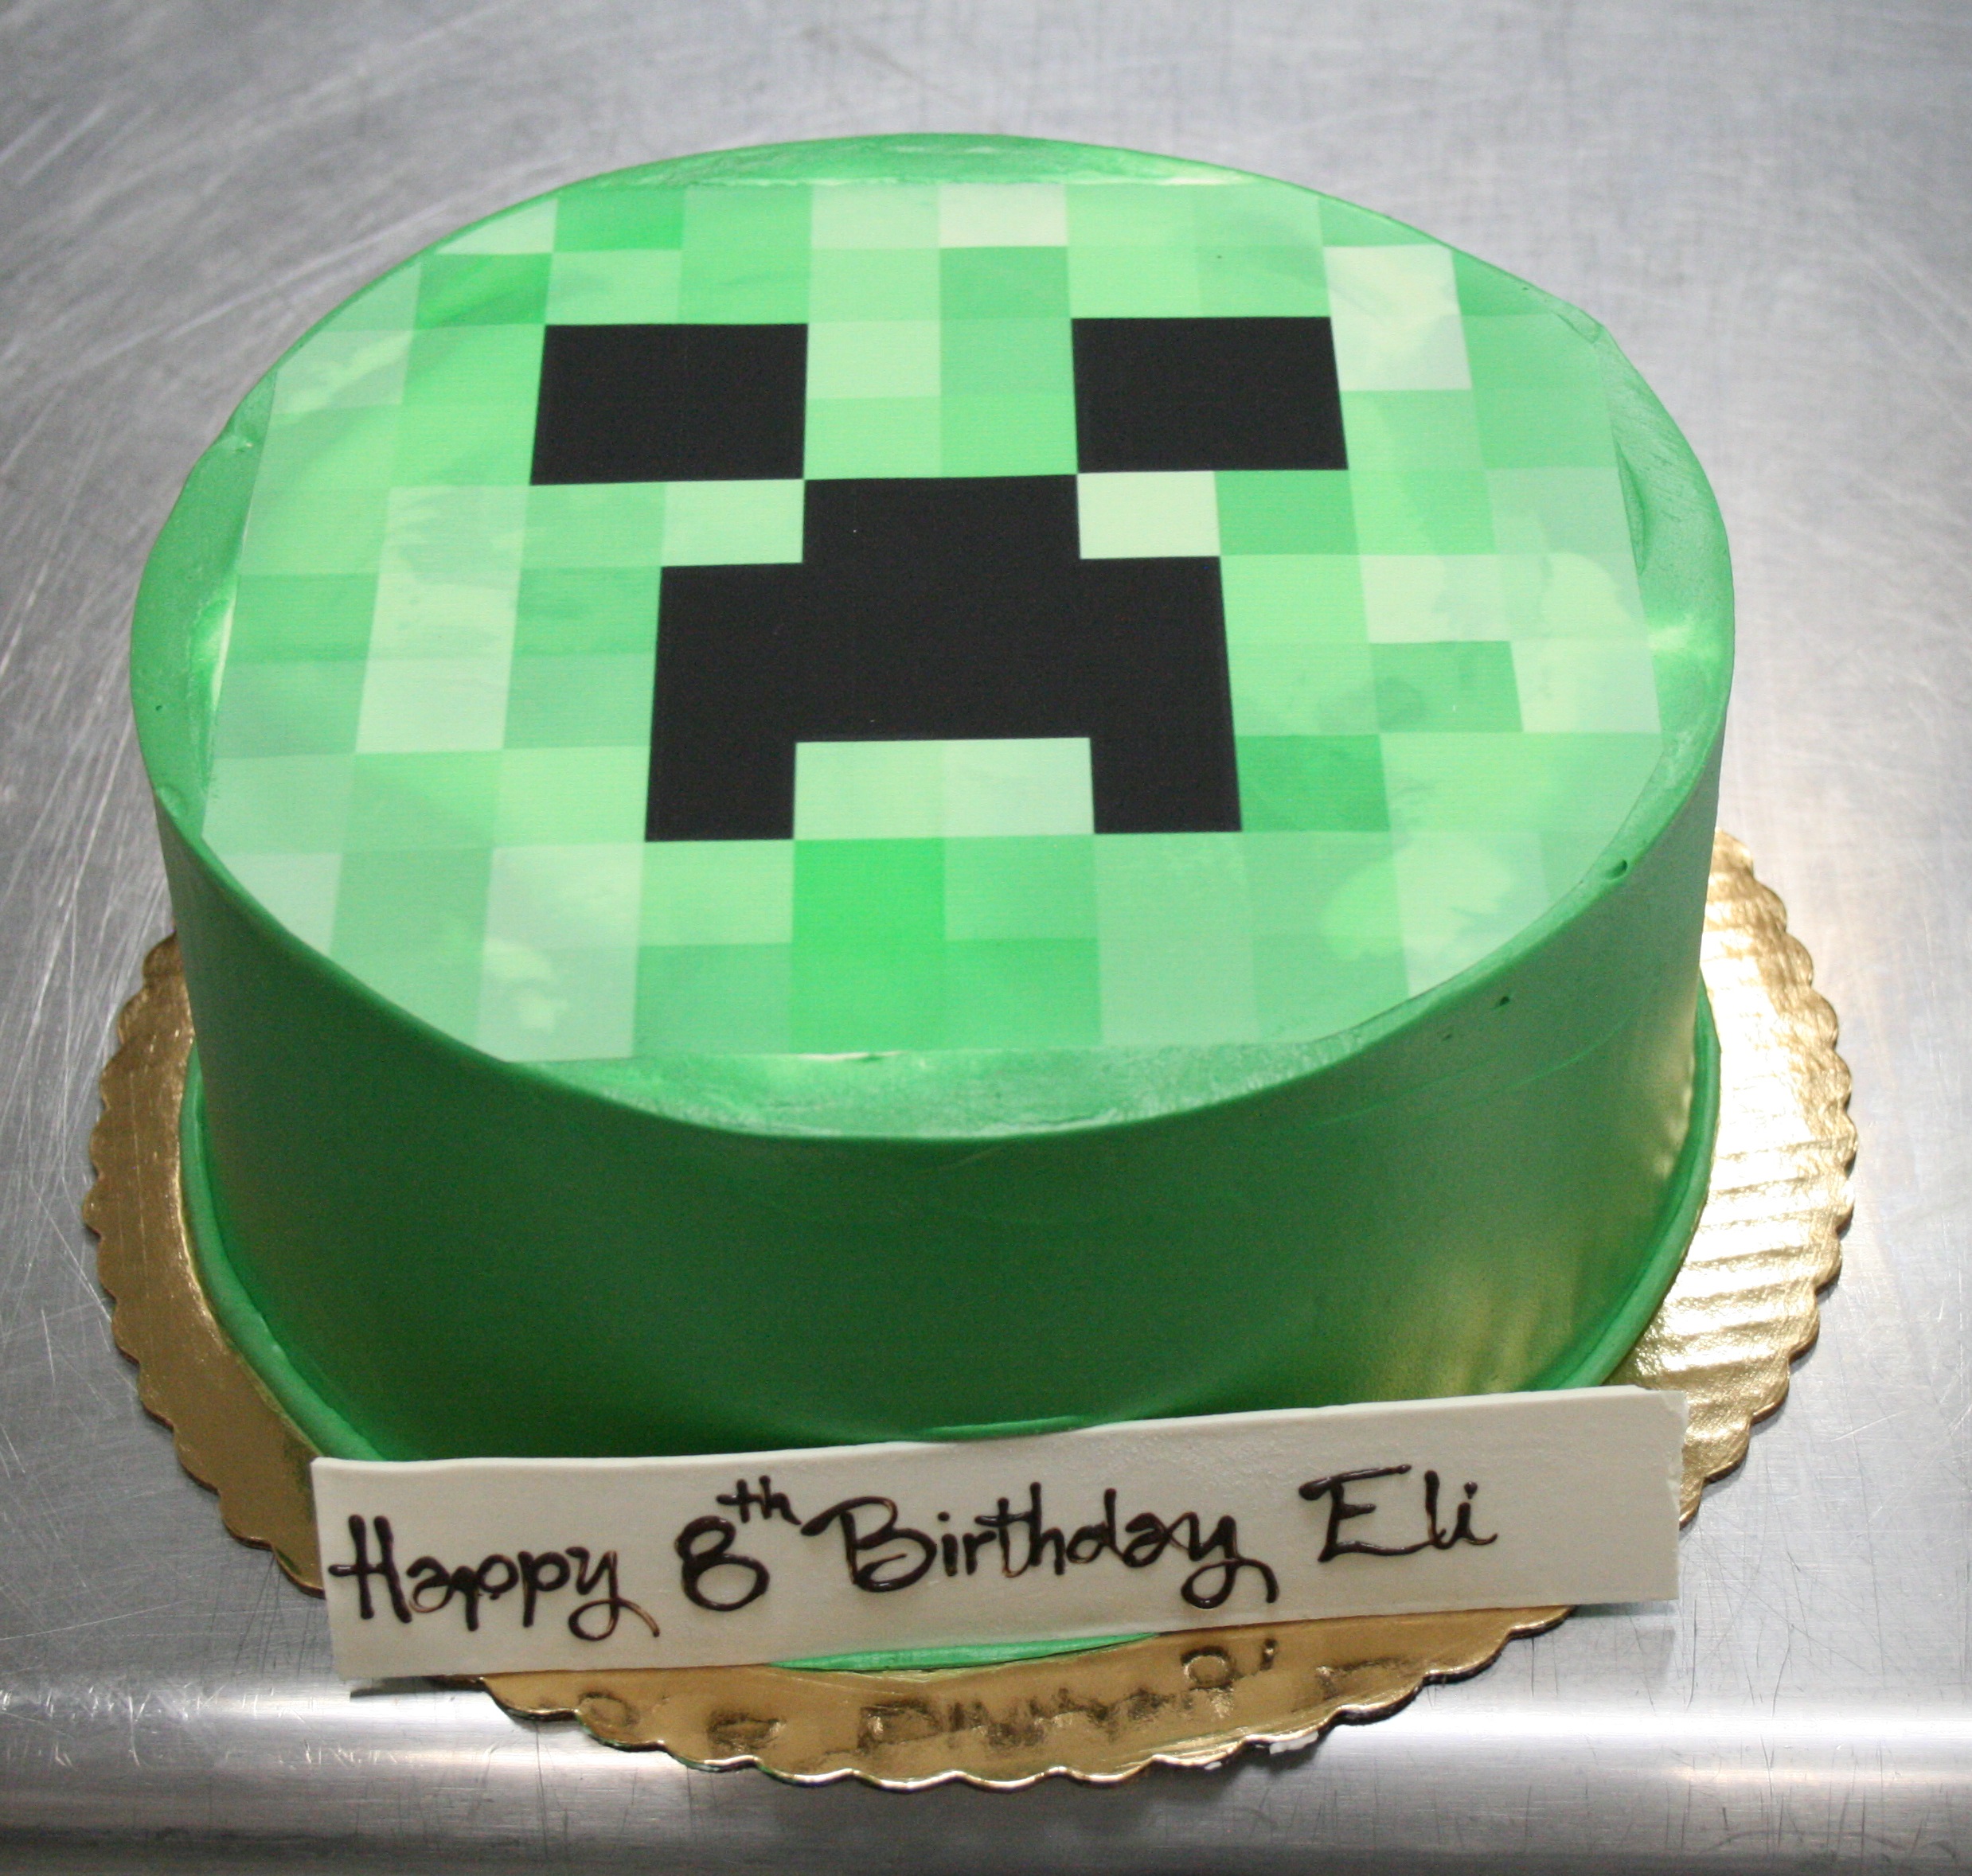 Minecraft Creeper Face Green Edible Cake Topper Image ABPID27364